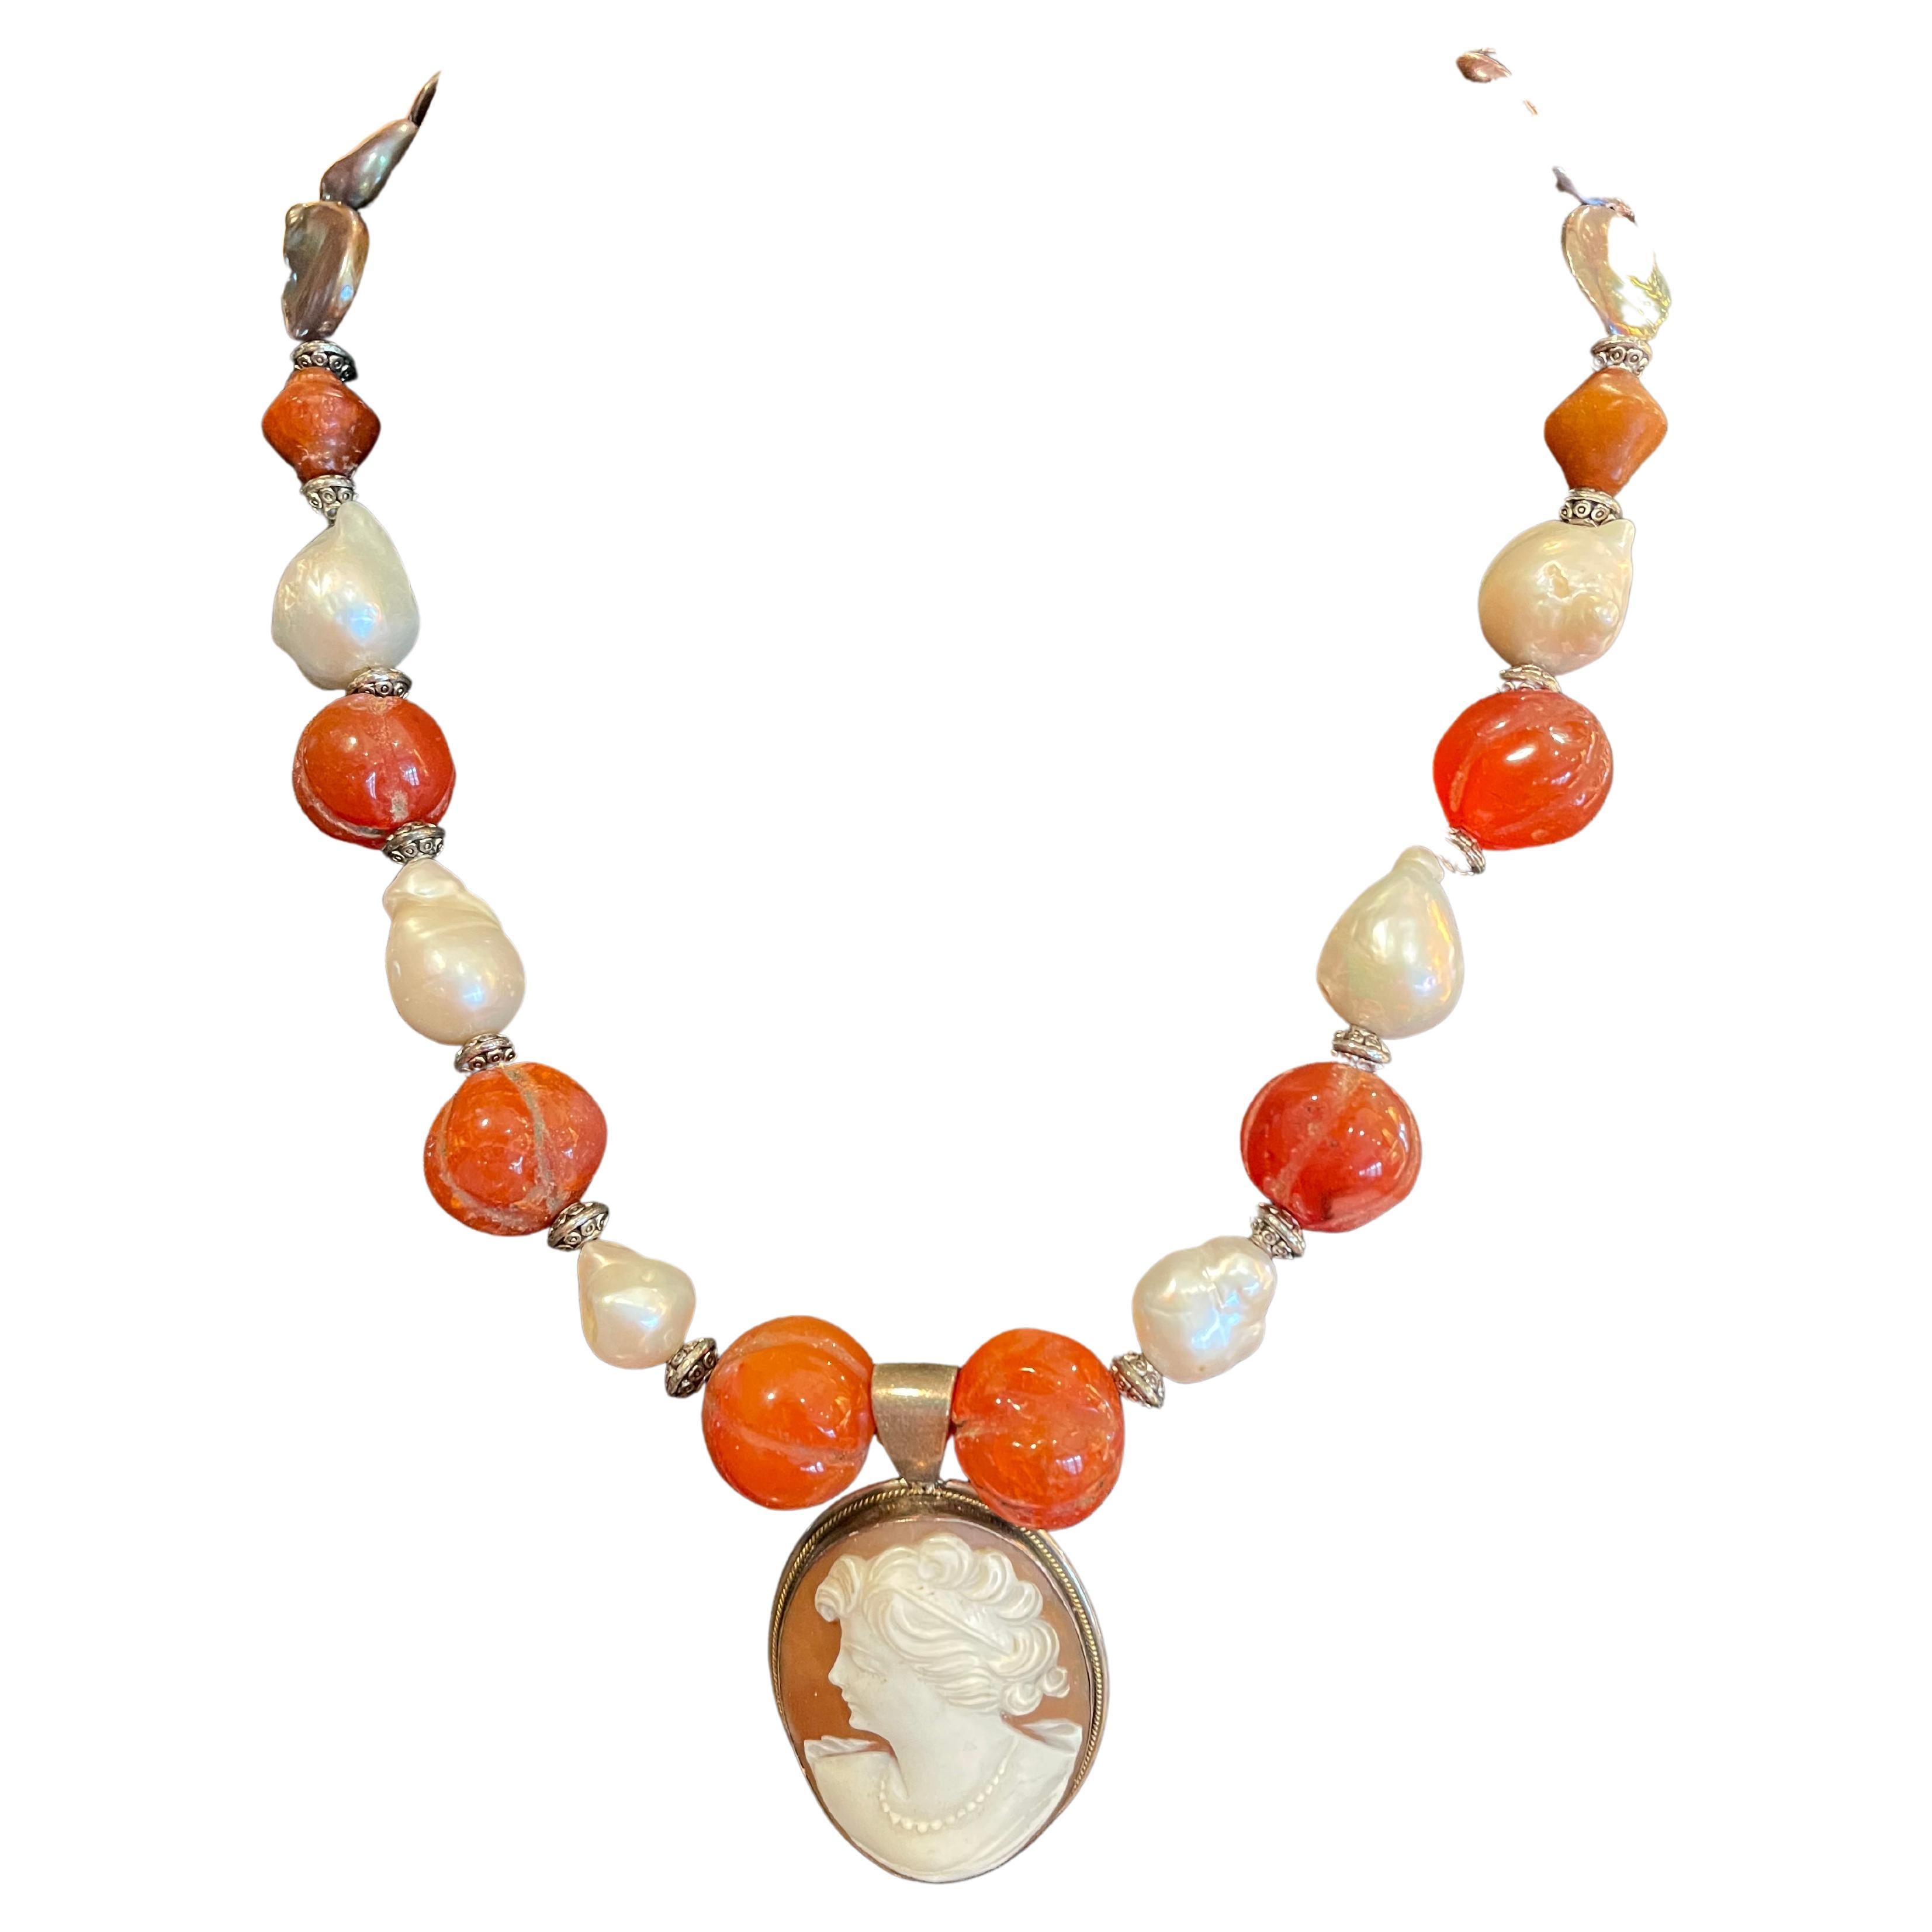 Vintage Italian cameo, baroque pearls, carved carnelian, one of a kind necklace For Sale